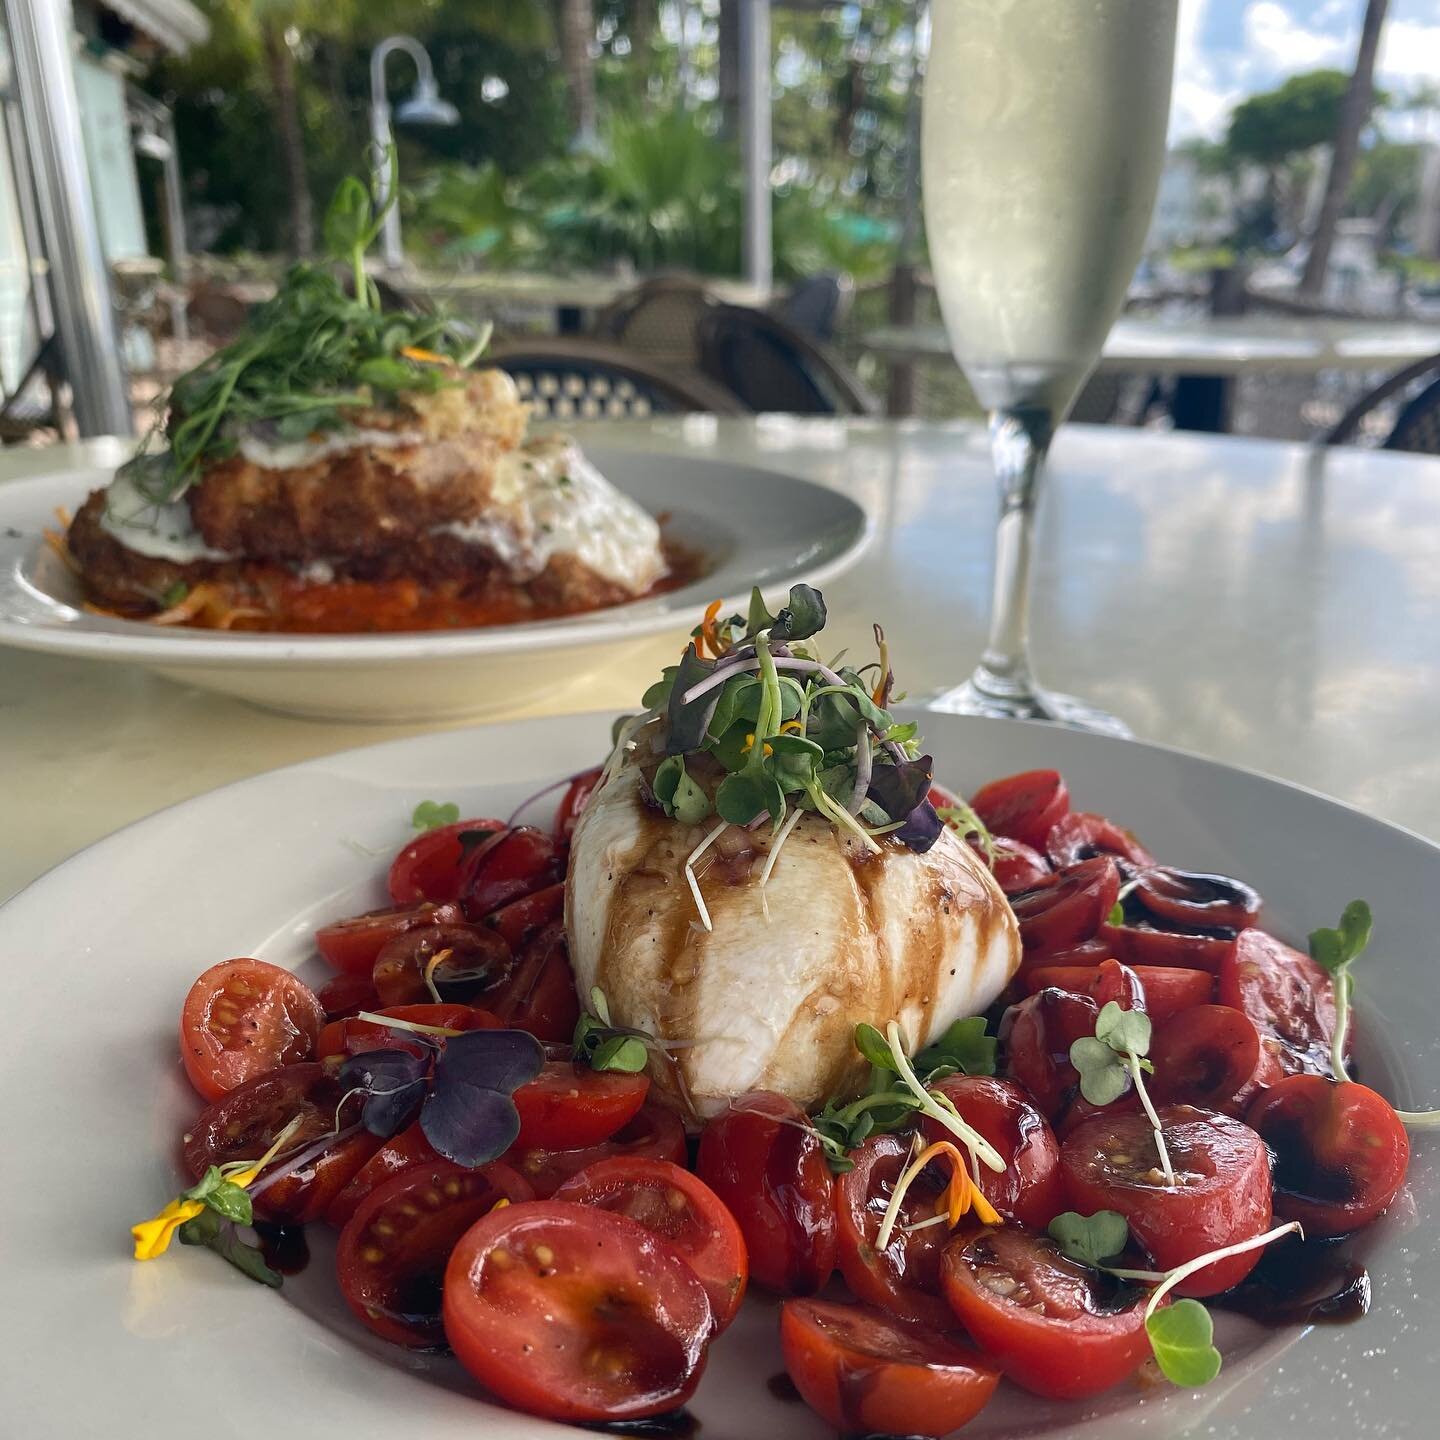 Today&rsquo;s lunch specials feature our Veal Parmesan $20 and Caprese Salad for $12.
Fresh Mozzarella, Tomatoes and herbs with balsamic glaze. 

✨Check our story to see more photos of today&rsquo;s lunch specials!

#frigatesnpb #lunchspecials #north